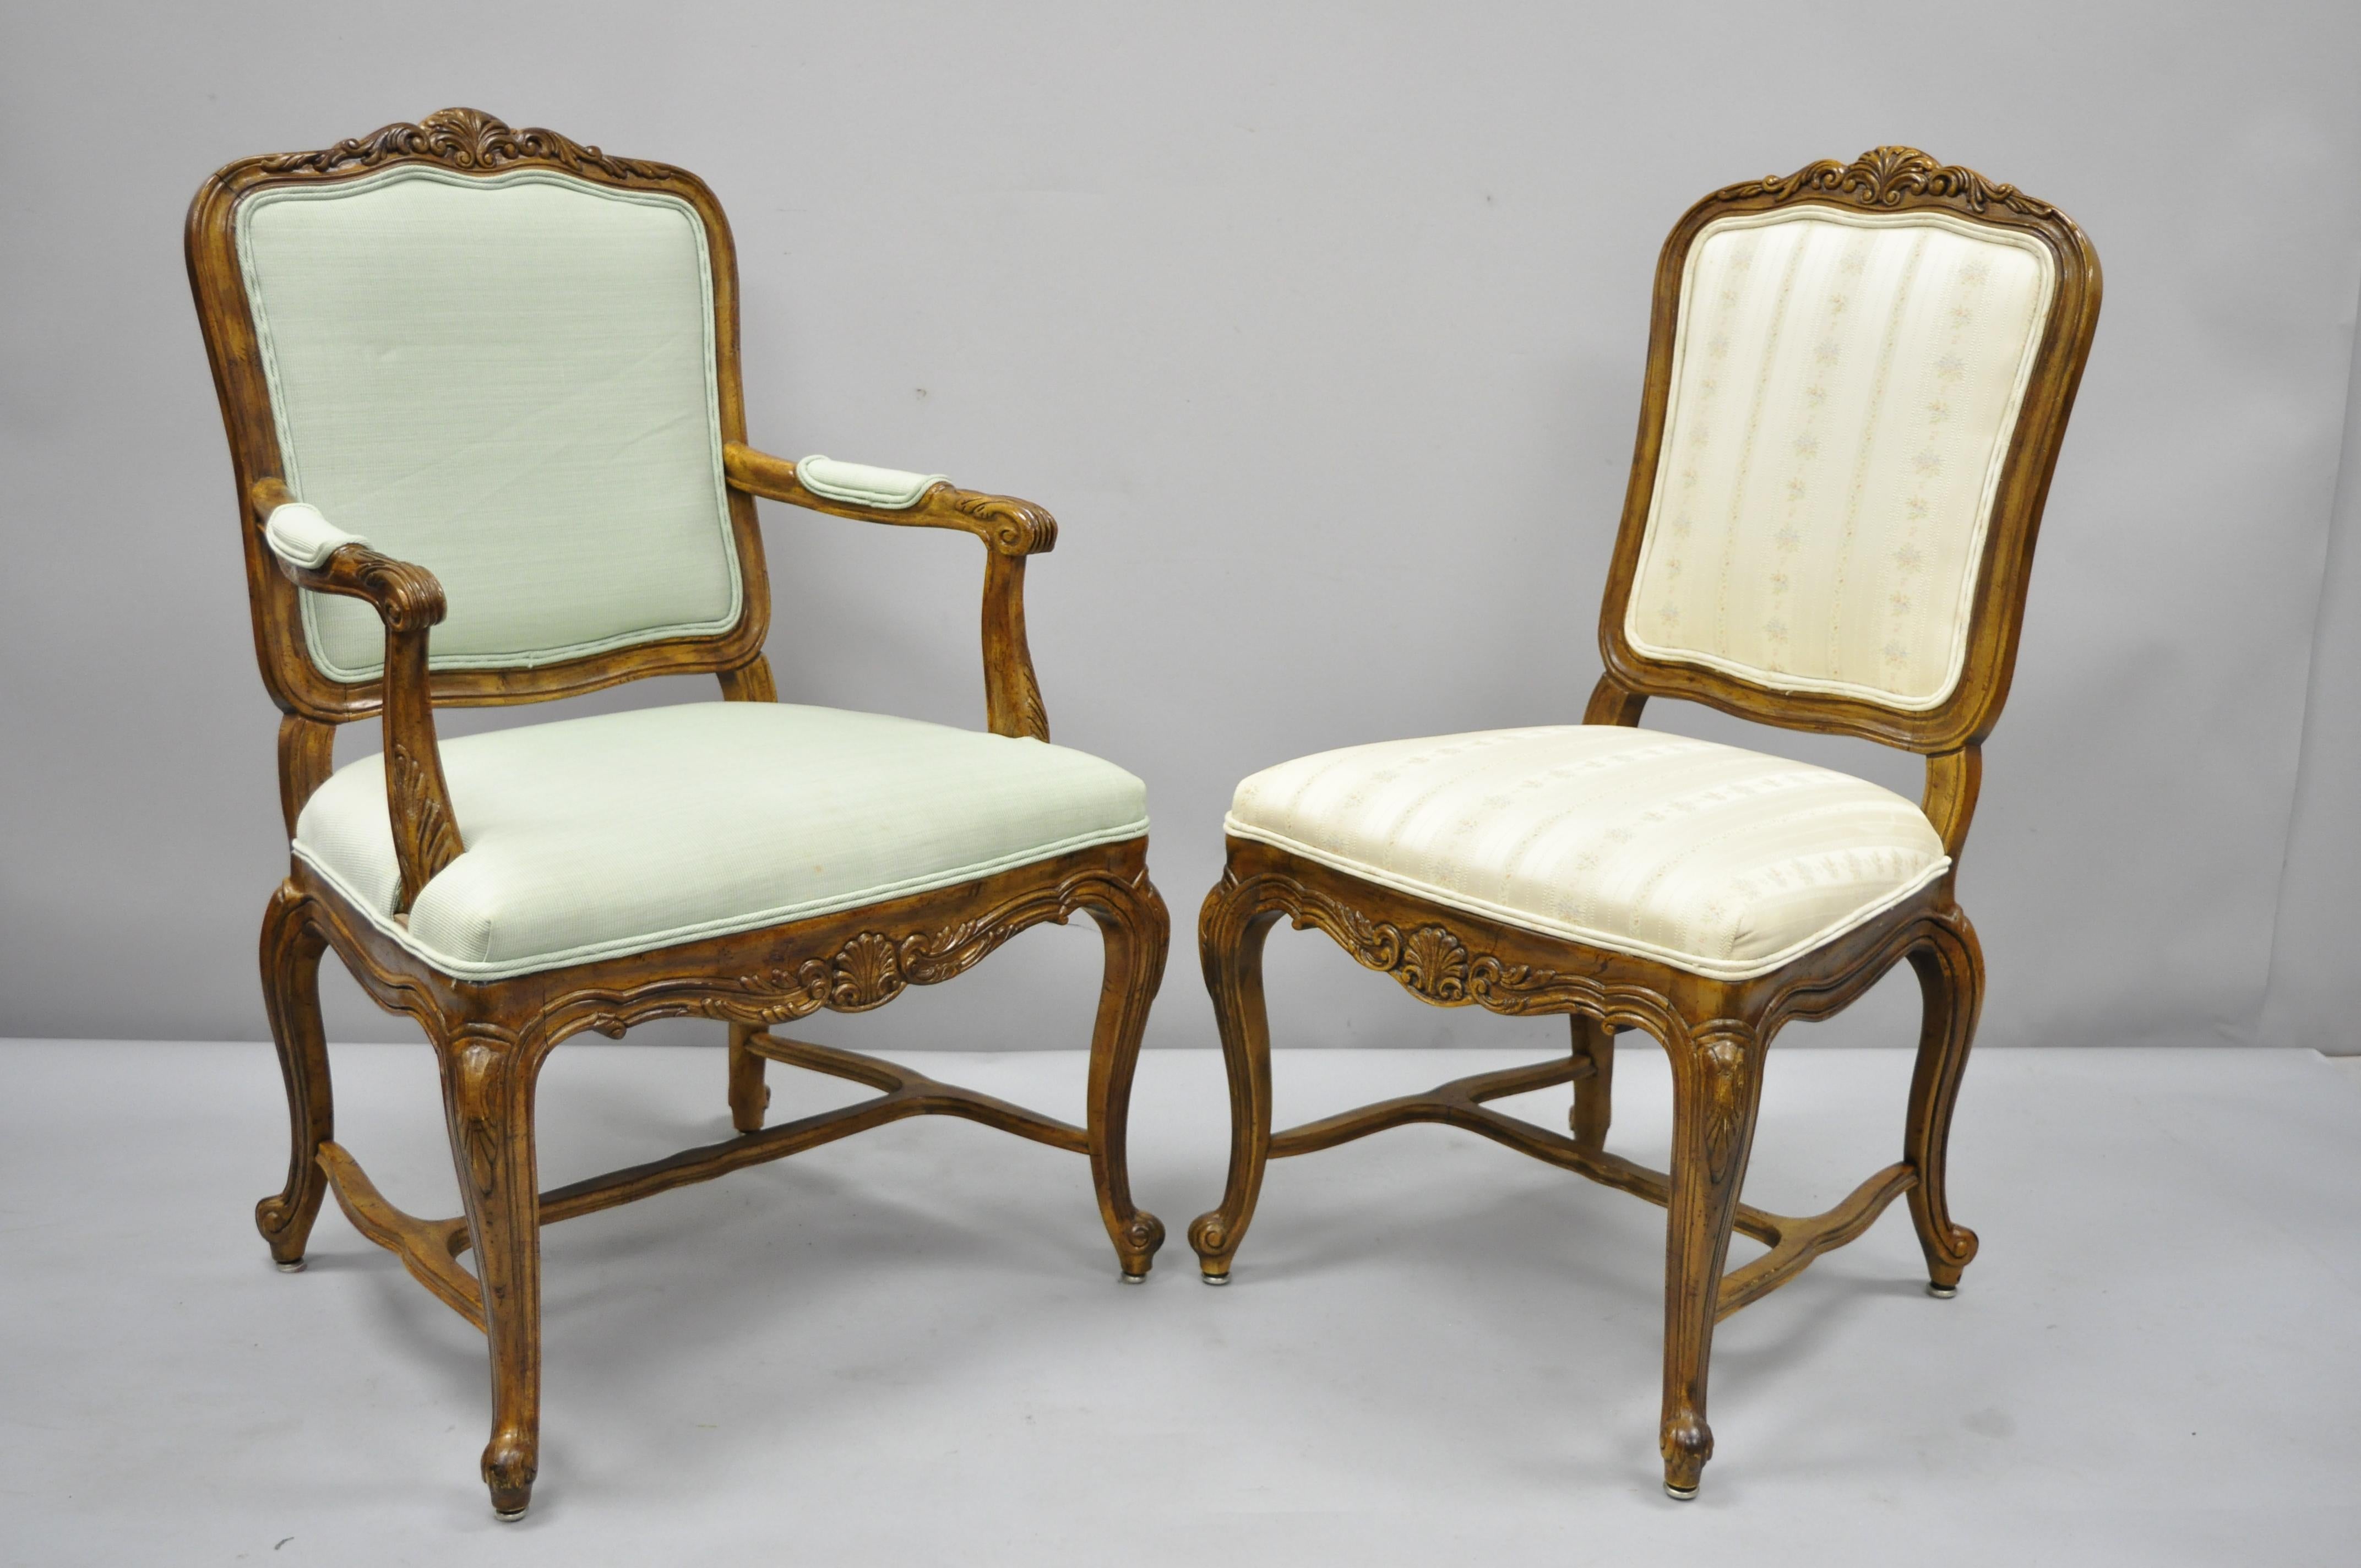 Set of 6 Drexel heritage old continent French provincial Louis XV style dining chairs. Listing includes (4) side chairs, (2) arm chairs, solid wood construction, beautiful wood grain, nicely carved details, original label, cabriole legs, quality